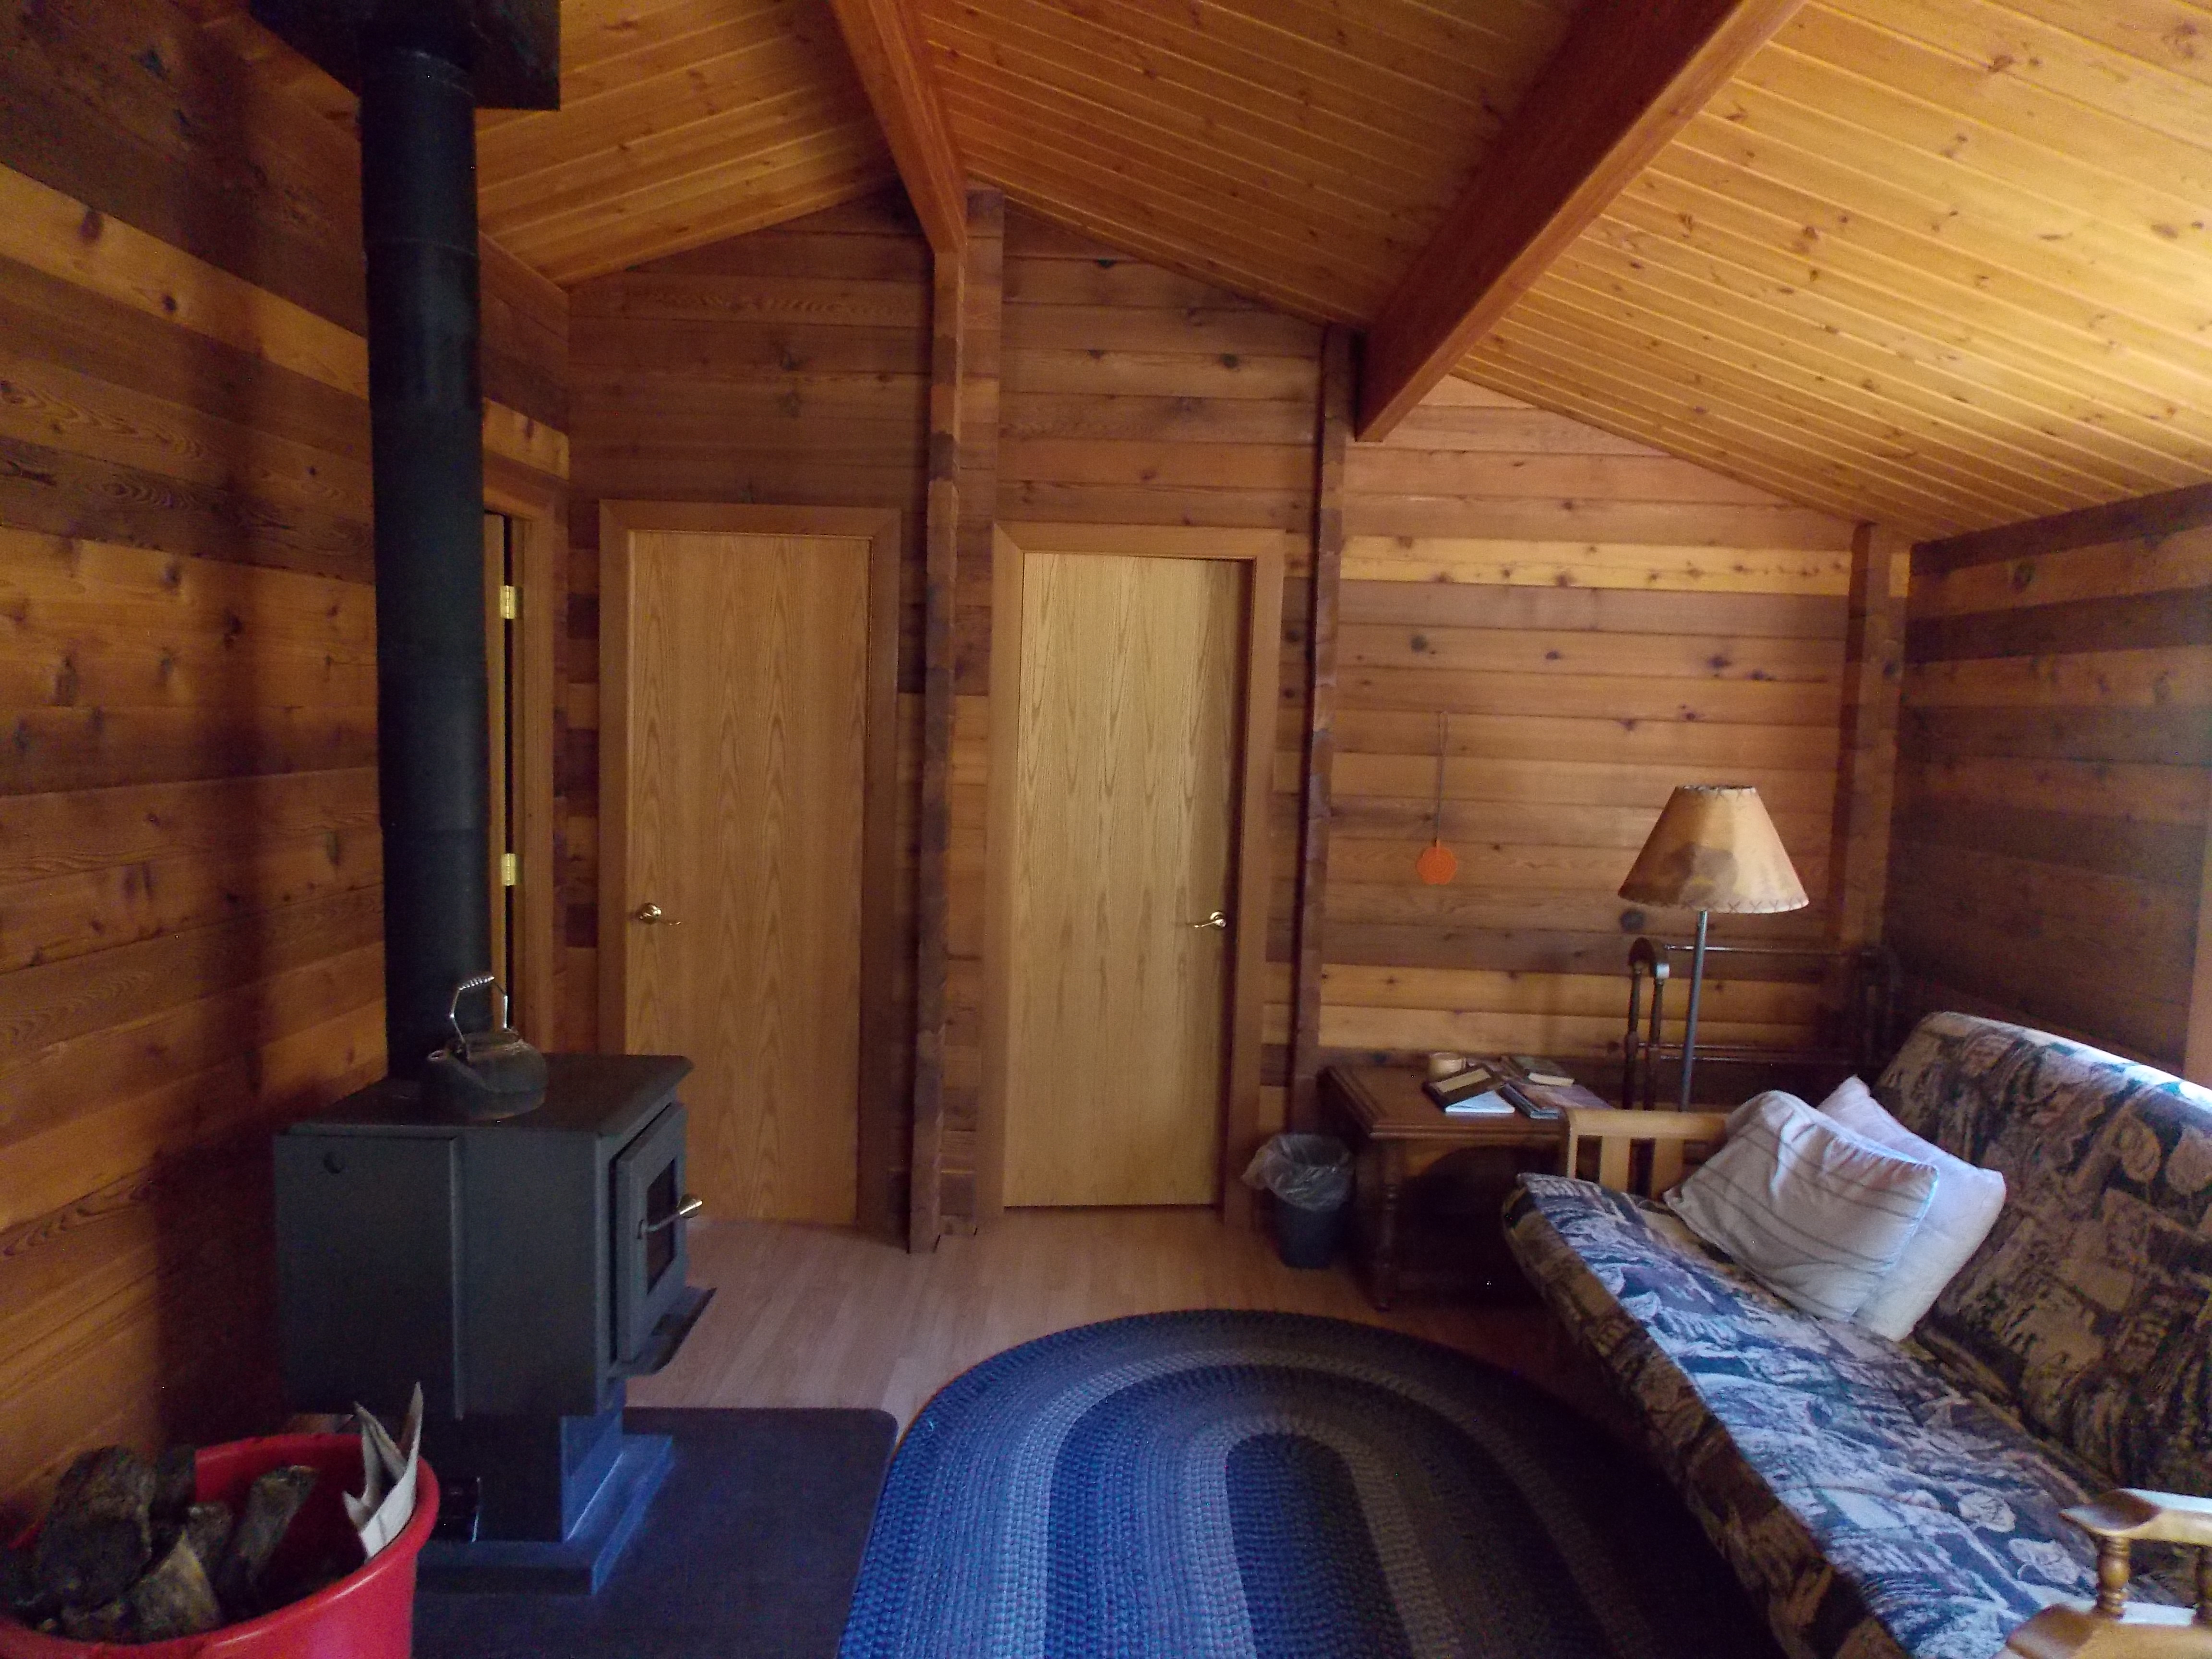 Inside one of our cozy cabins!